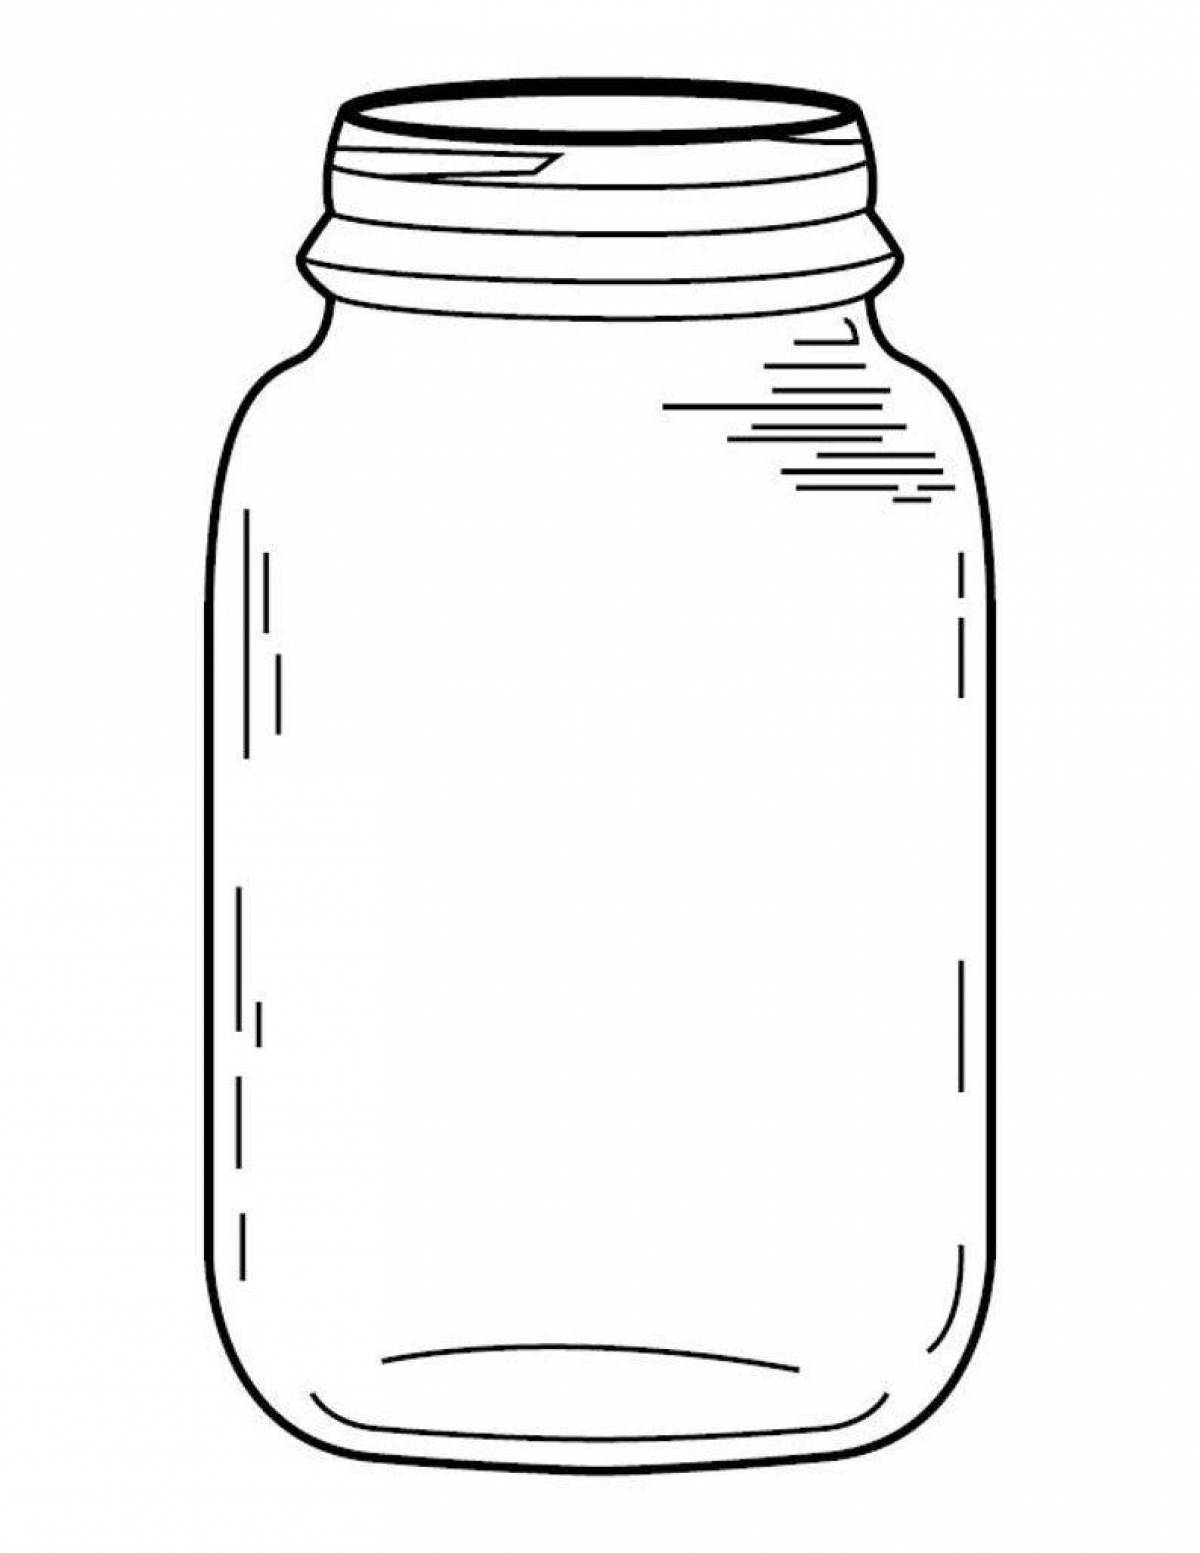 Coloring with an enlarged jar